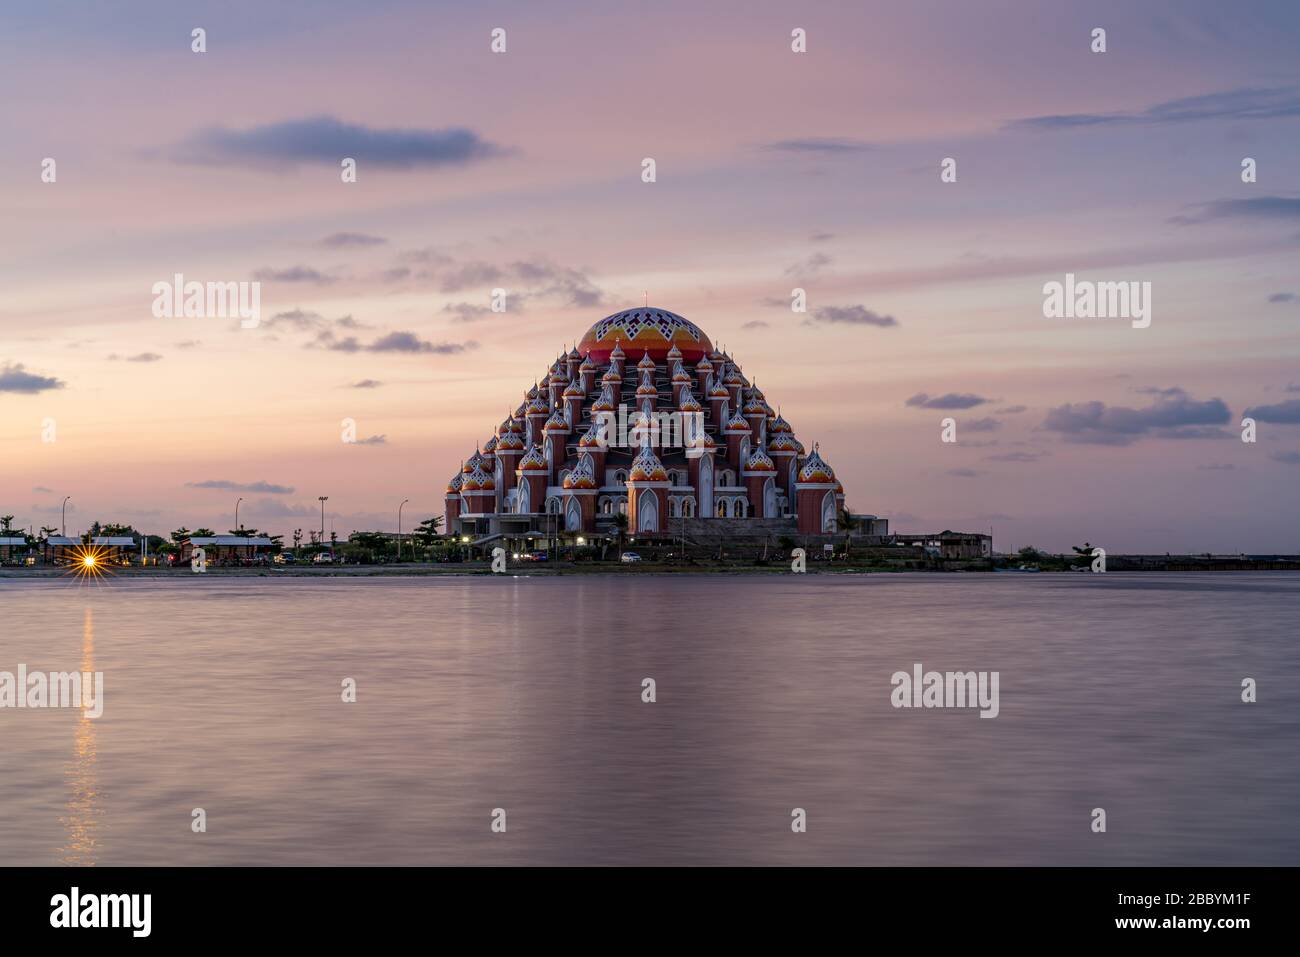 The 99 domes mosque in Makassar, Sulawesi, Indonesia, at sunset with pink sky Stock Photo